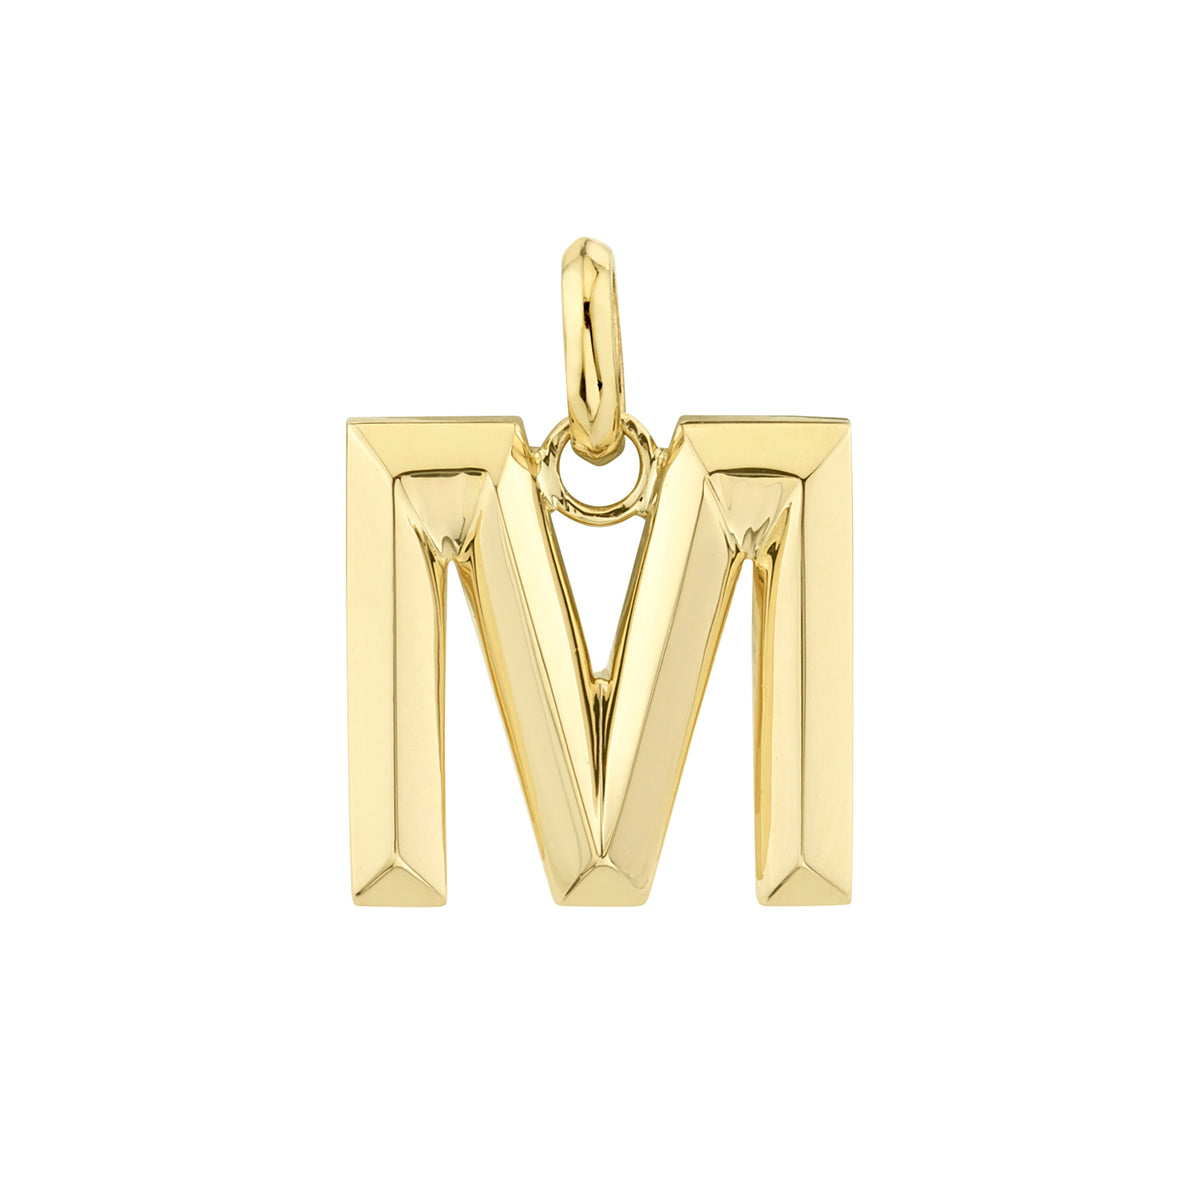 READY TO SHIP GOLD LETTER PENDANT